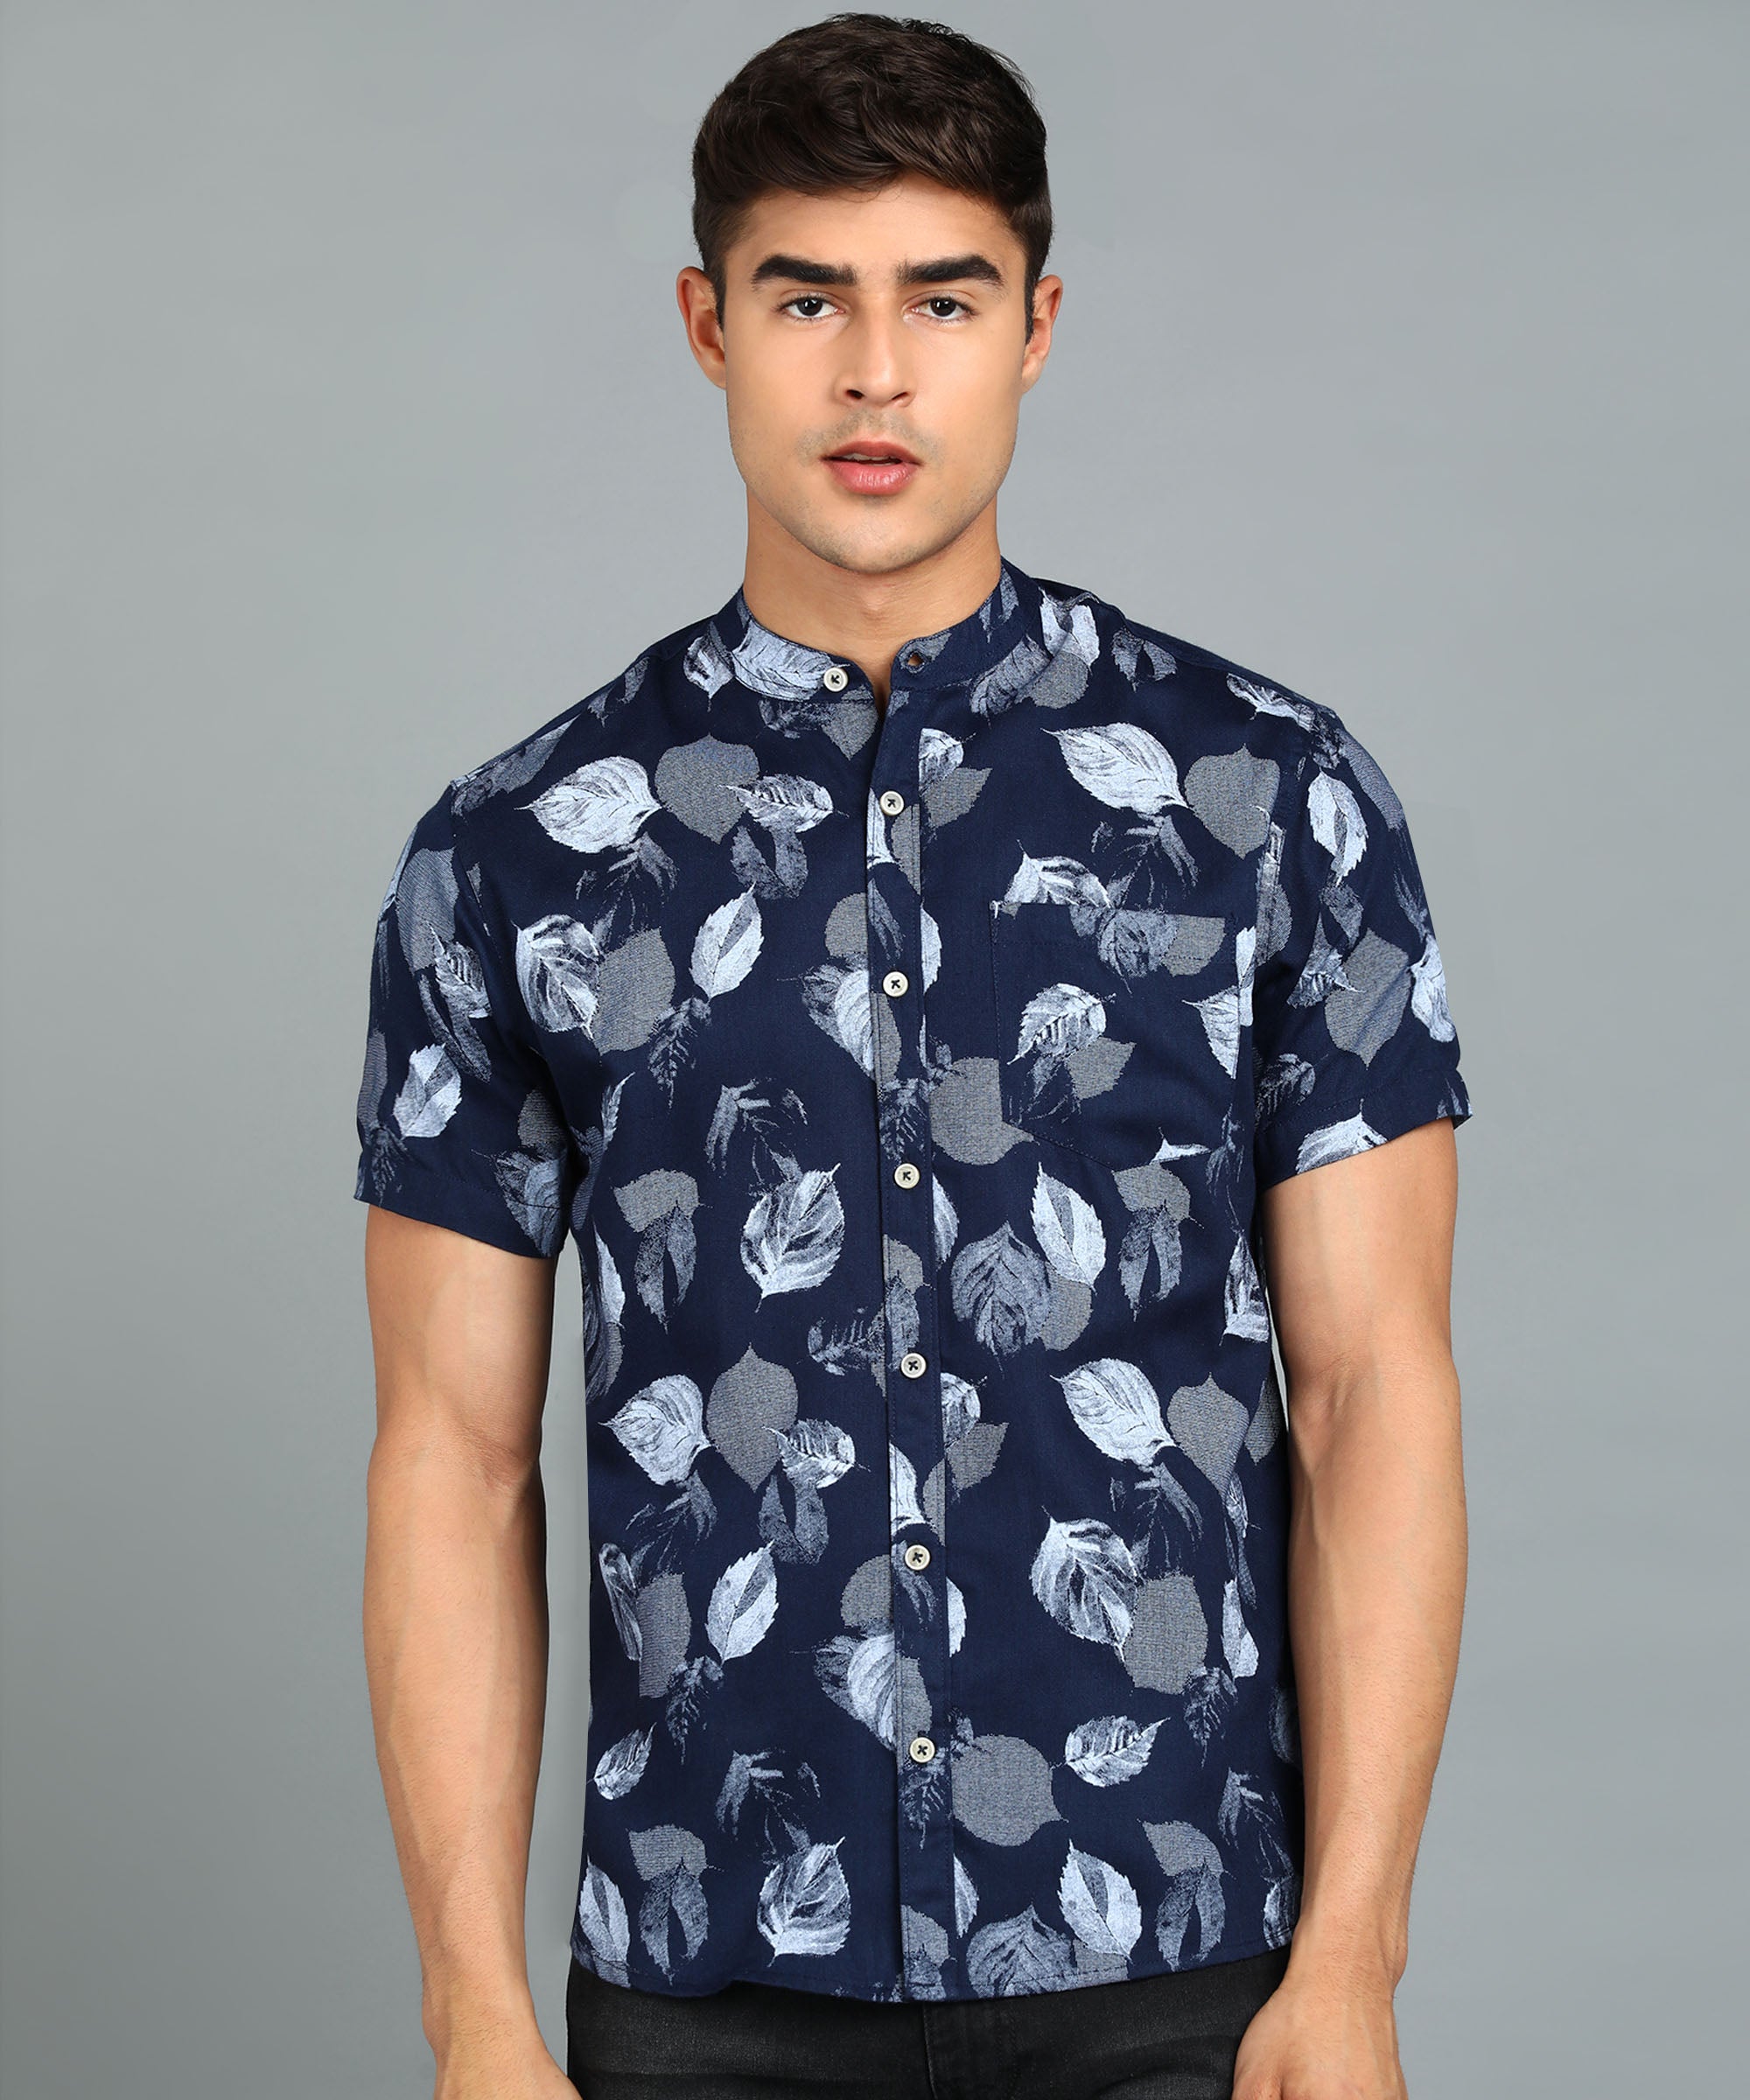 Men's Navy Blue Cotton Half Sleeve Slim Fit Casual Floral Printed Shirt